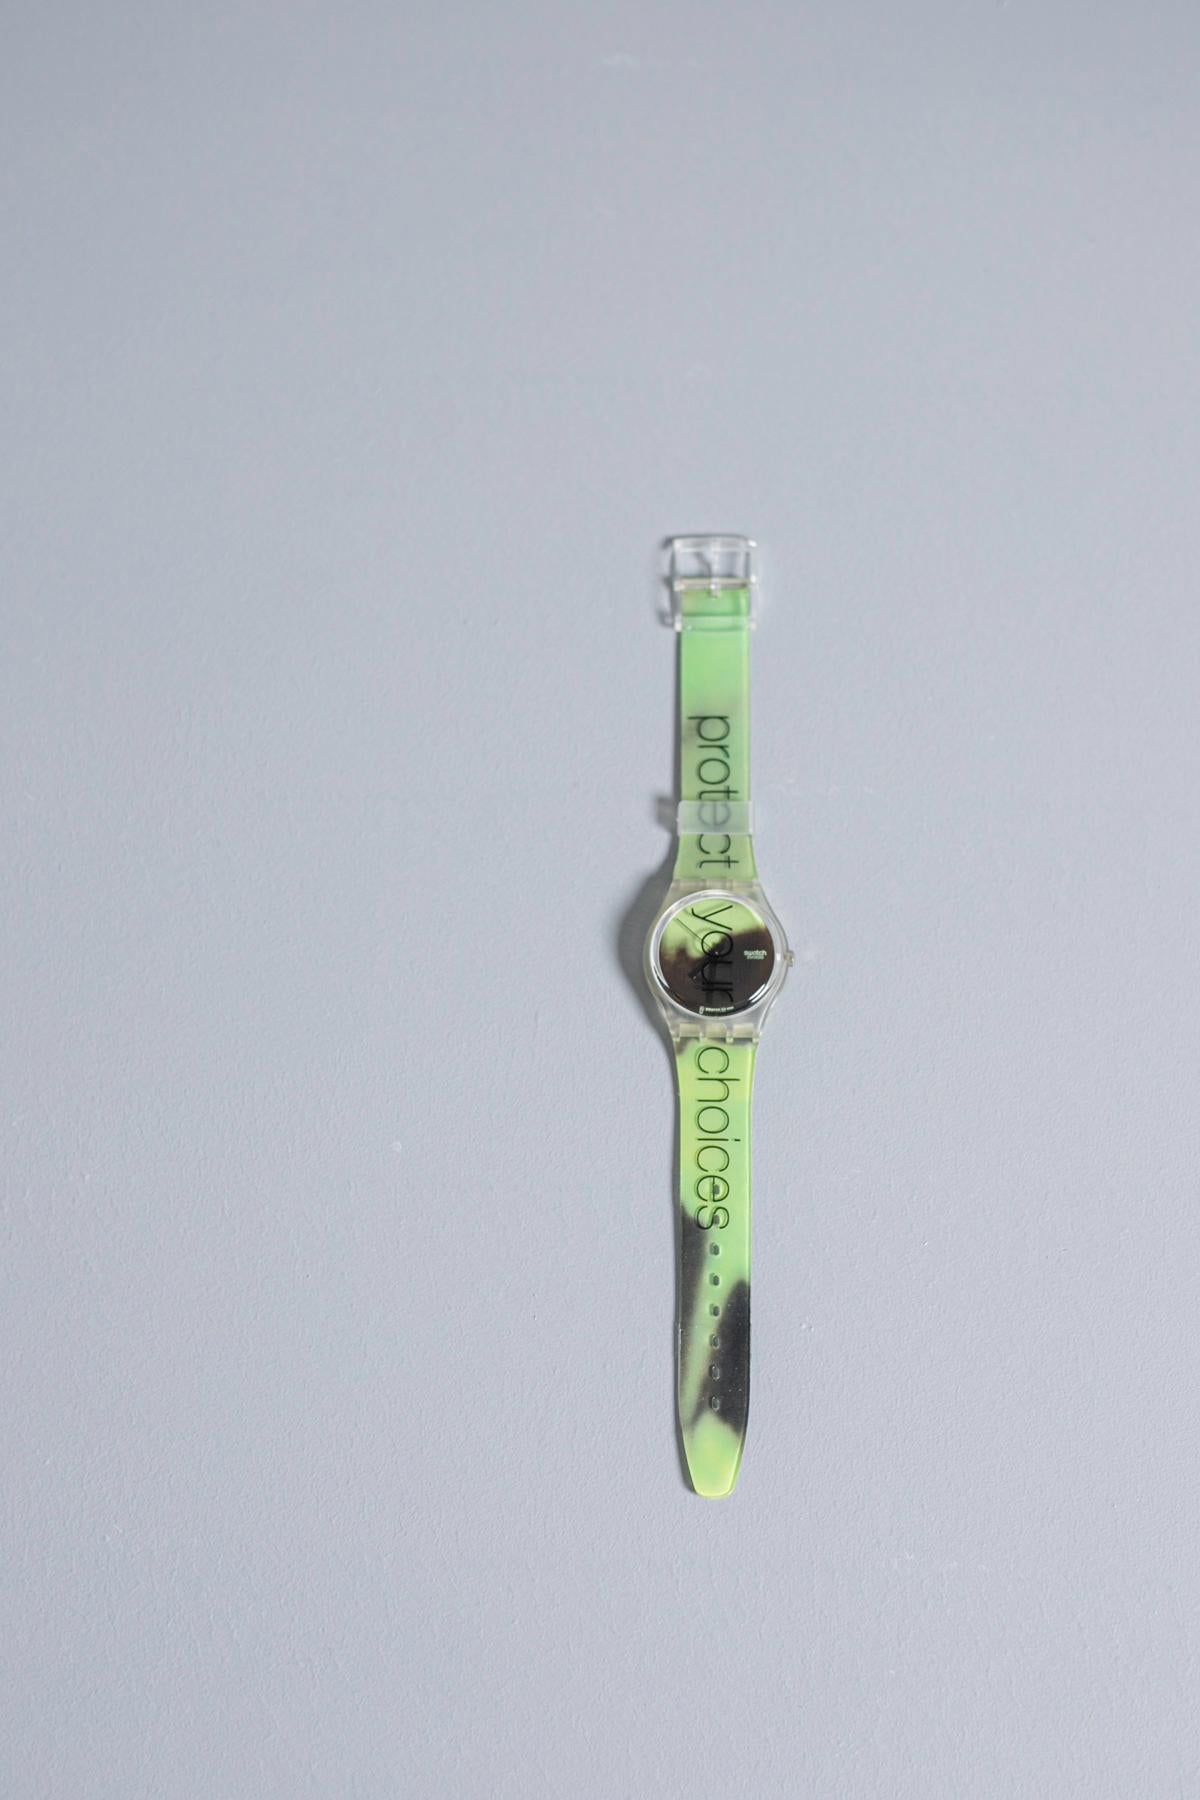 Vintage Swatch with a minimal design and acid green color, along the entire strap there is the writing 